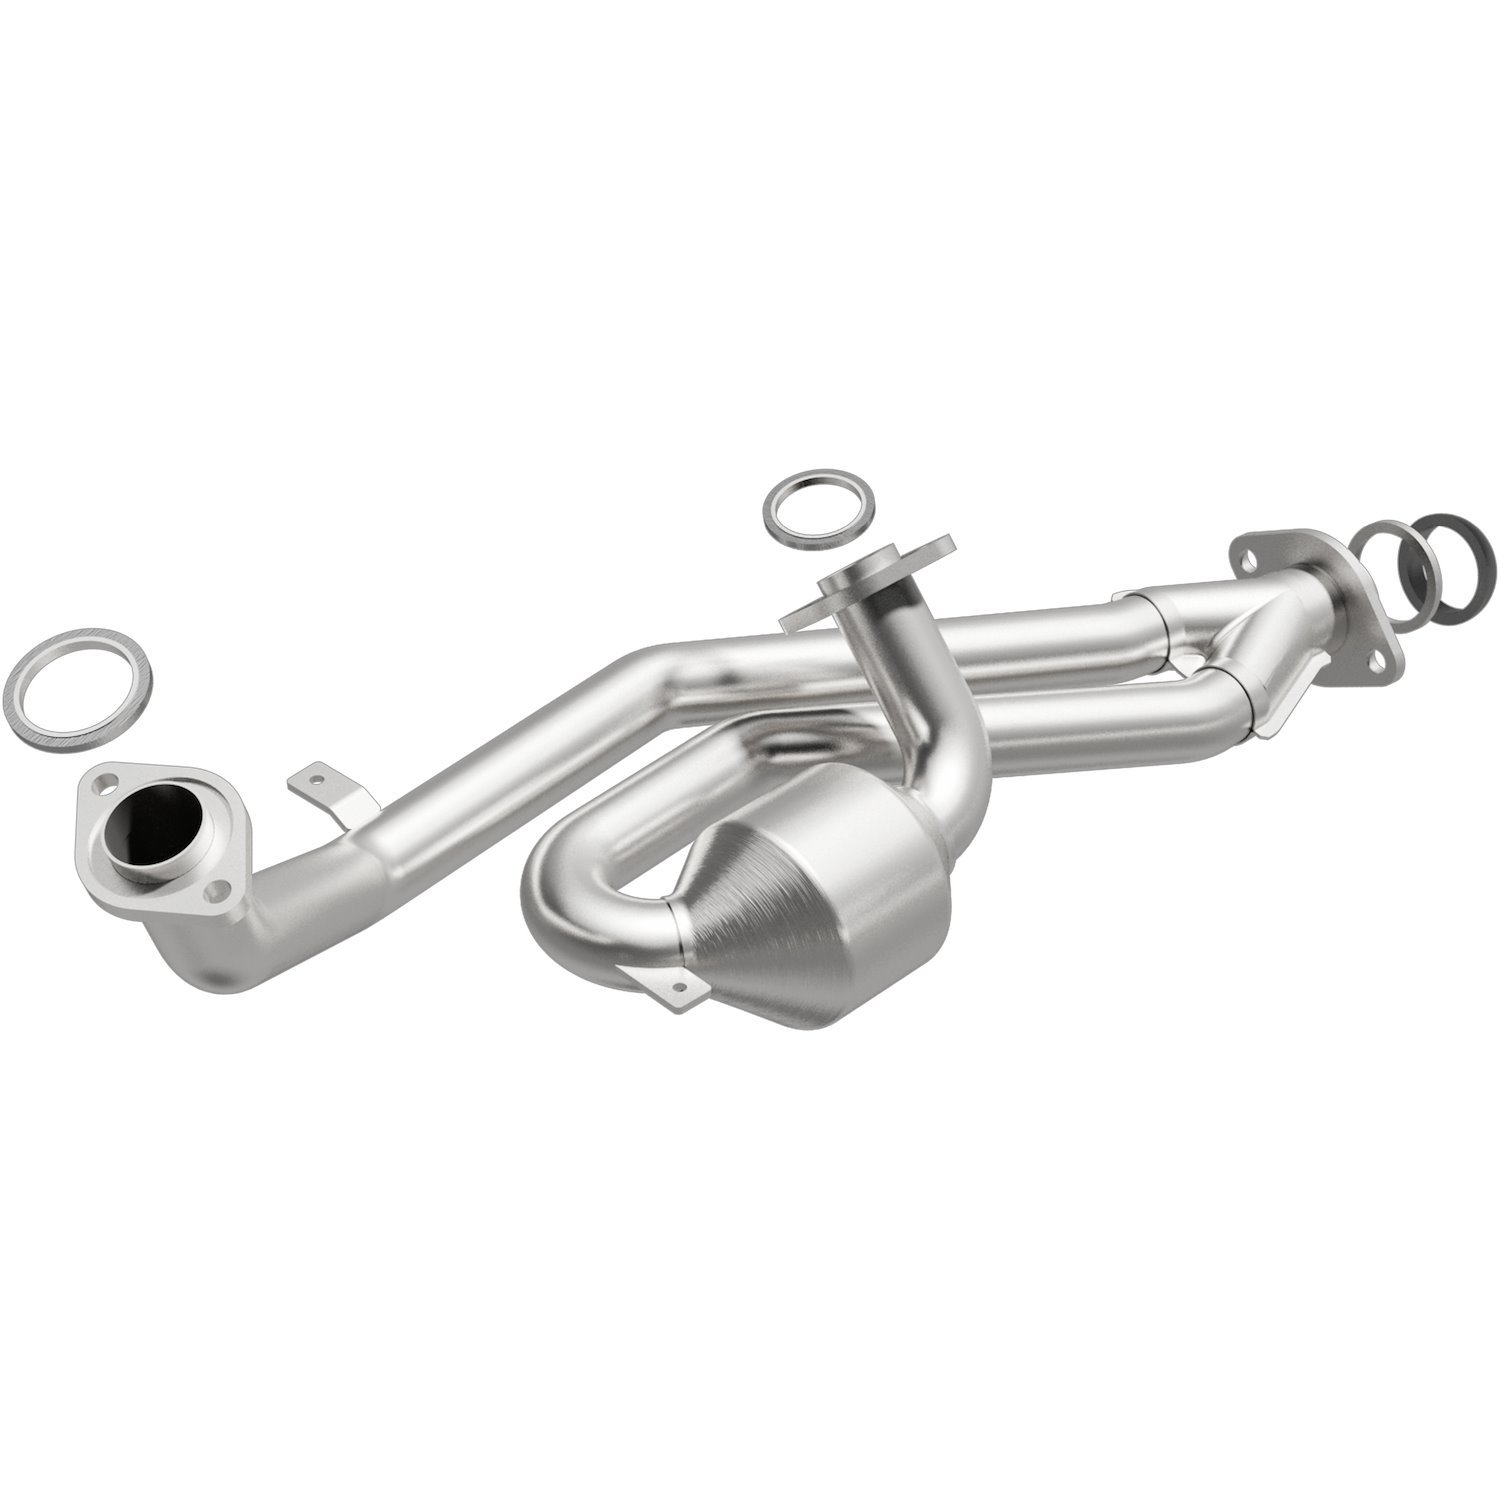 2001-2003 Toyota Sienna California Grade CARB Compliant Direct-Fit Catalytic Converter